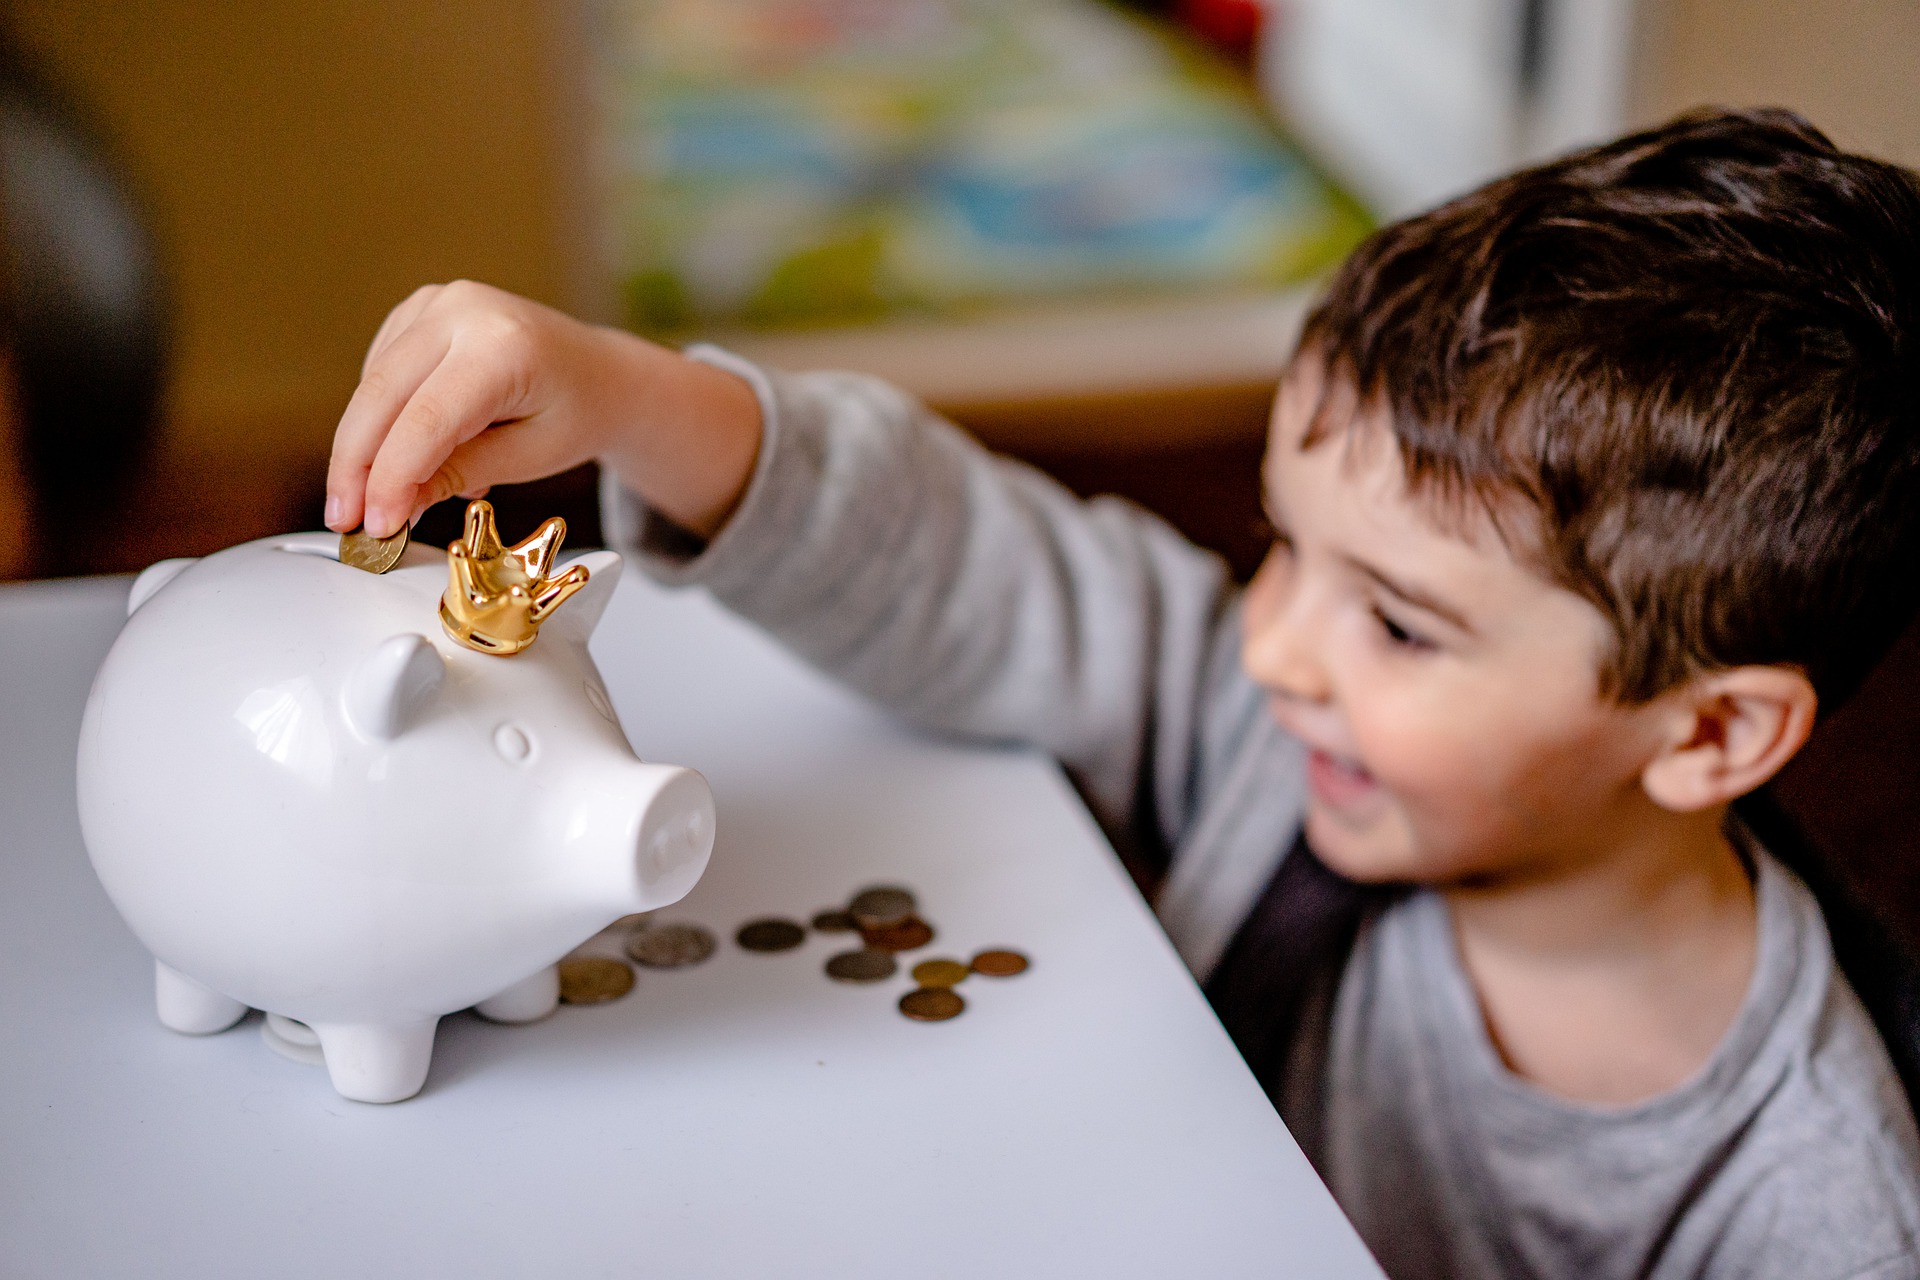 child putting coin into white piggy bank